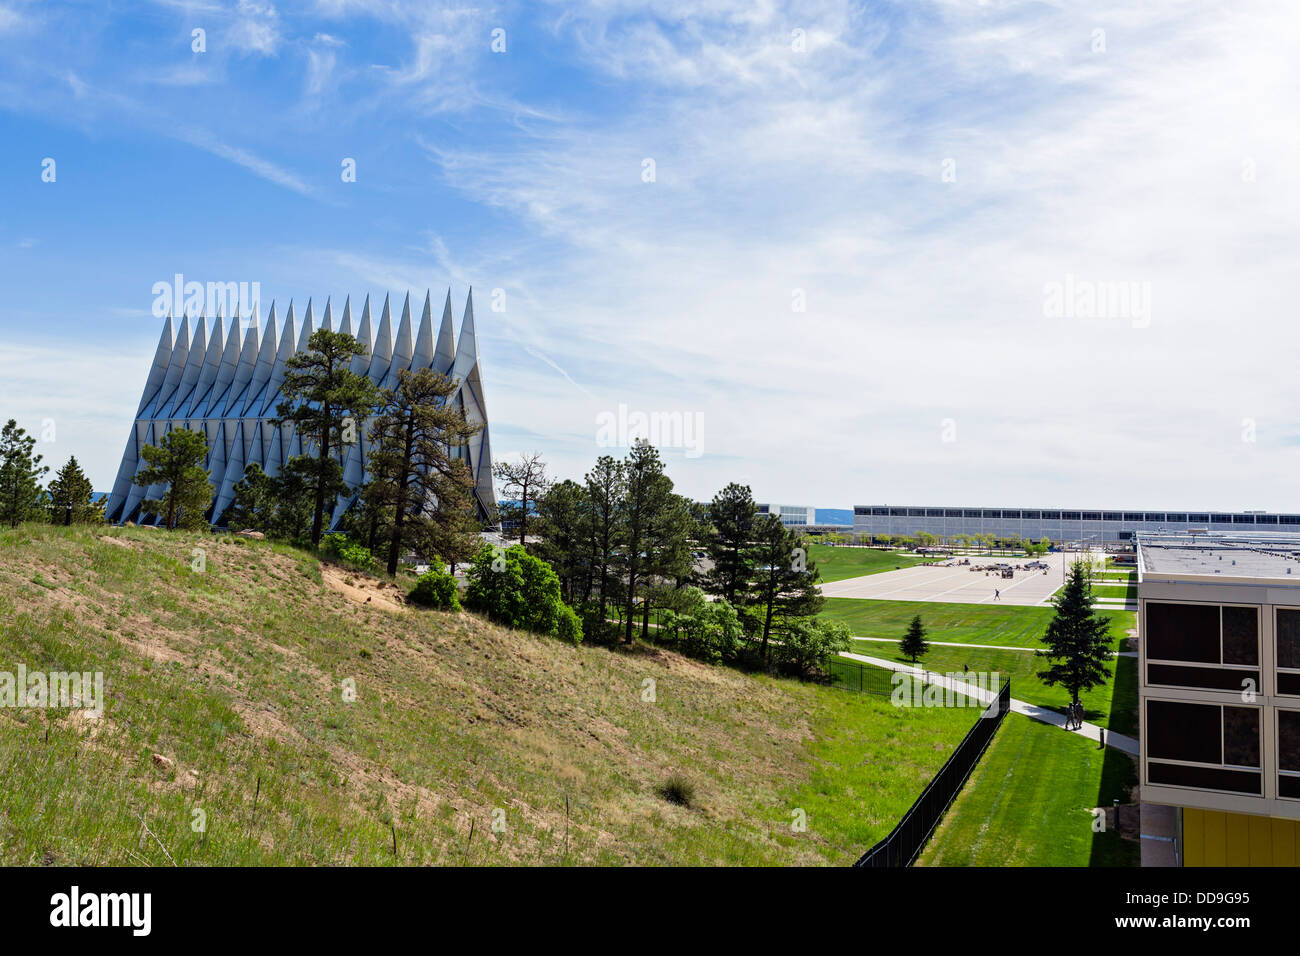 Cadet Chapel and parade ground at the United States Air Force Academy, Colorado Springs, Colorado, USA Stock Photo